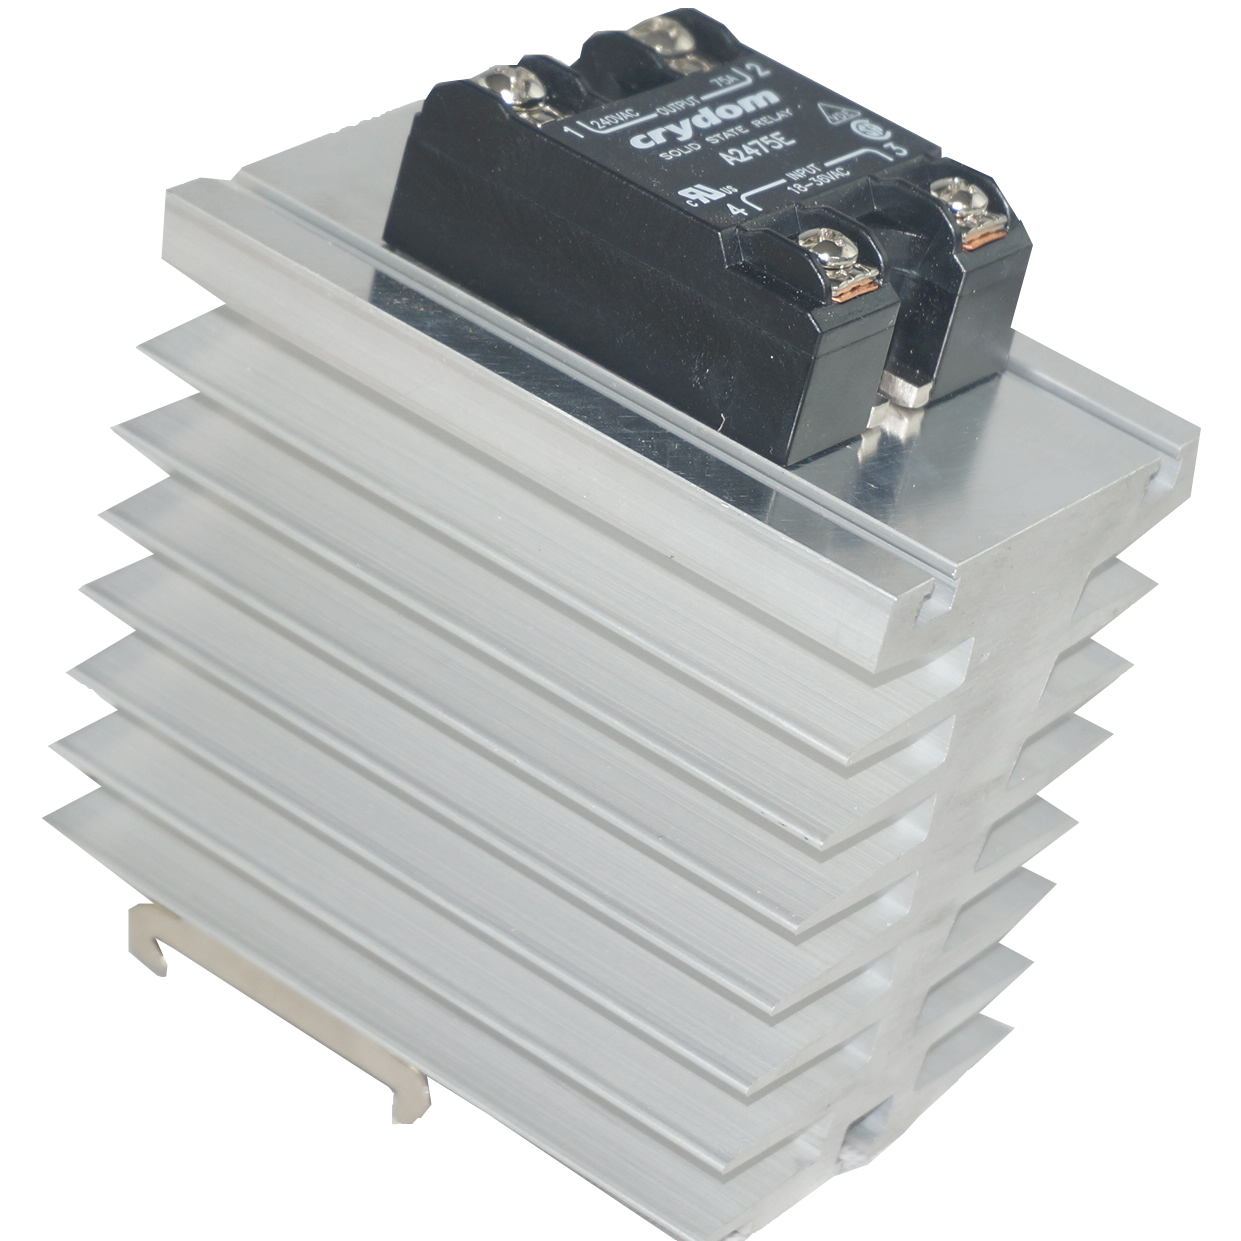 GFIN/100M-DR + HA4850E, Din Rail Mount Solid State Relay with Heatsink, 24VAC Control Input, 48-530VAC Output, 50 Amps @ 40 Deg C ambient